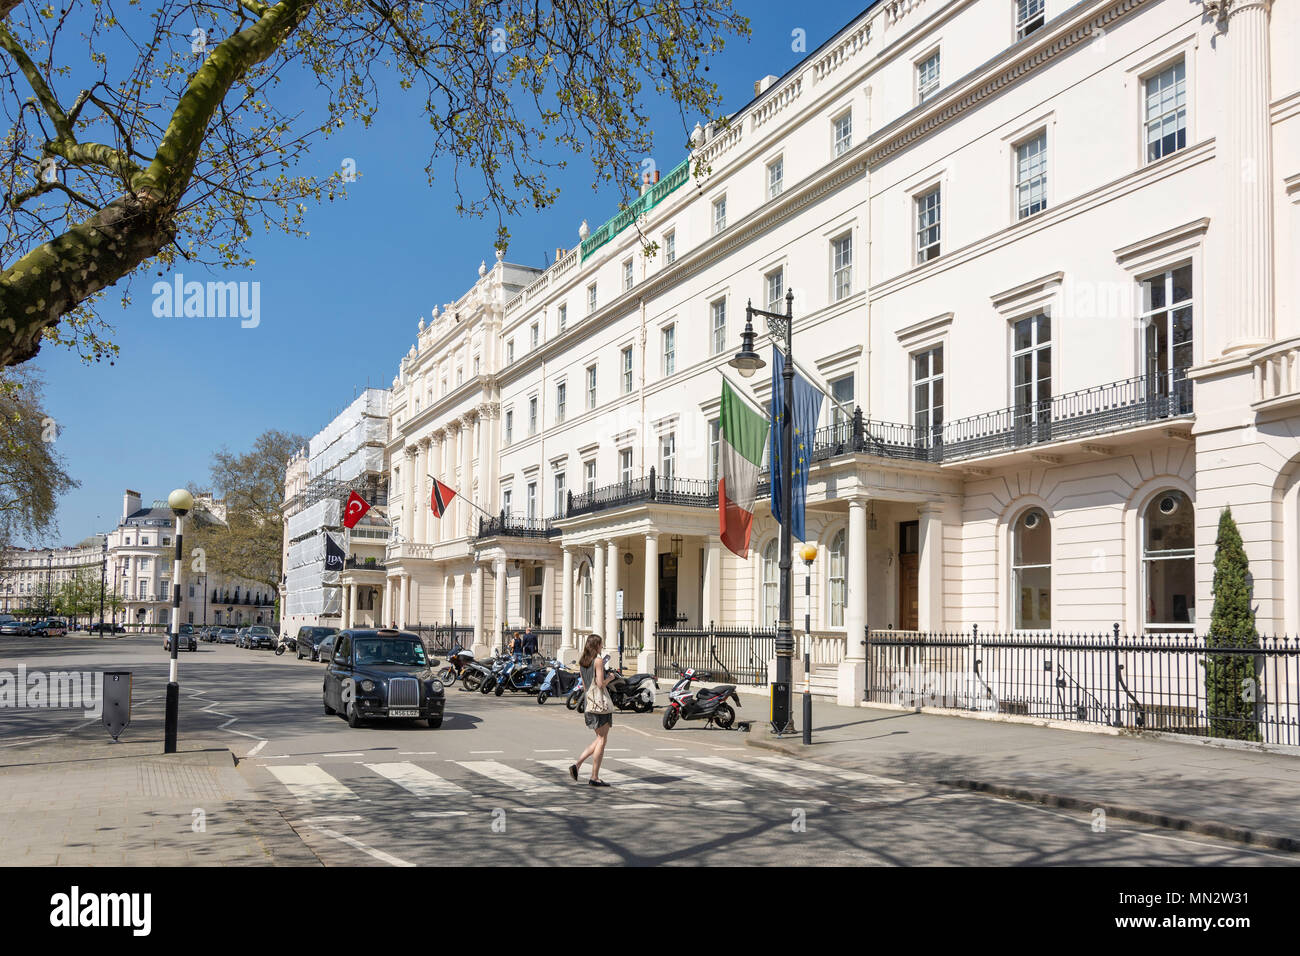 Embassy buildings in Belgrave Square, Belgravia, City of Westminster, Greater London, England, United Kingdom Stock Photo